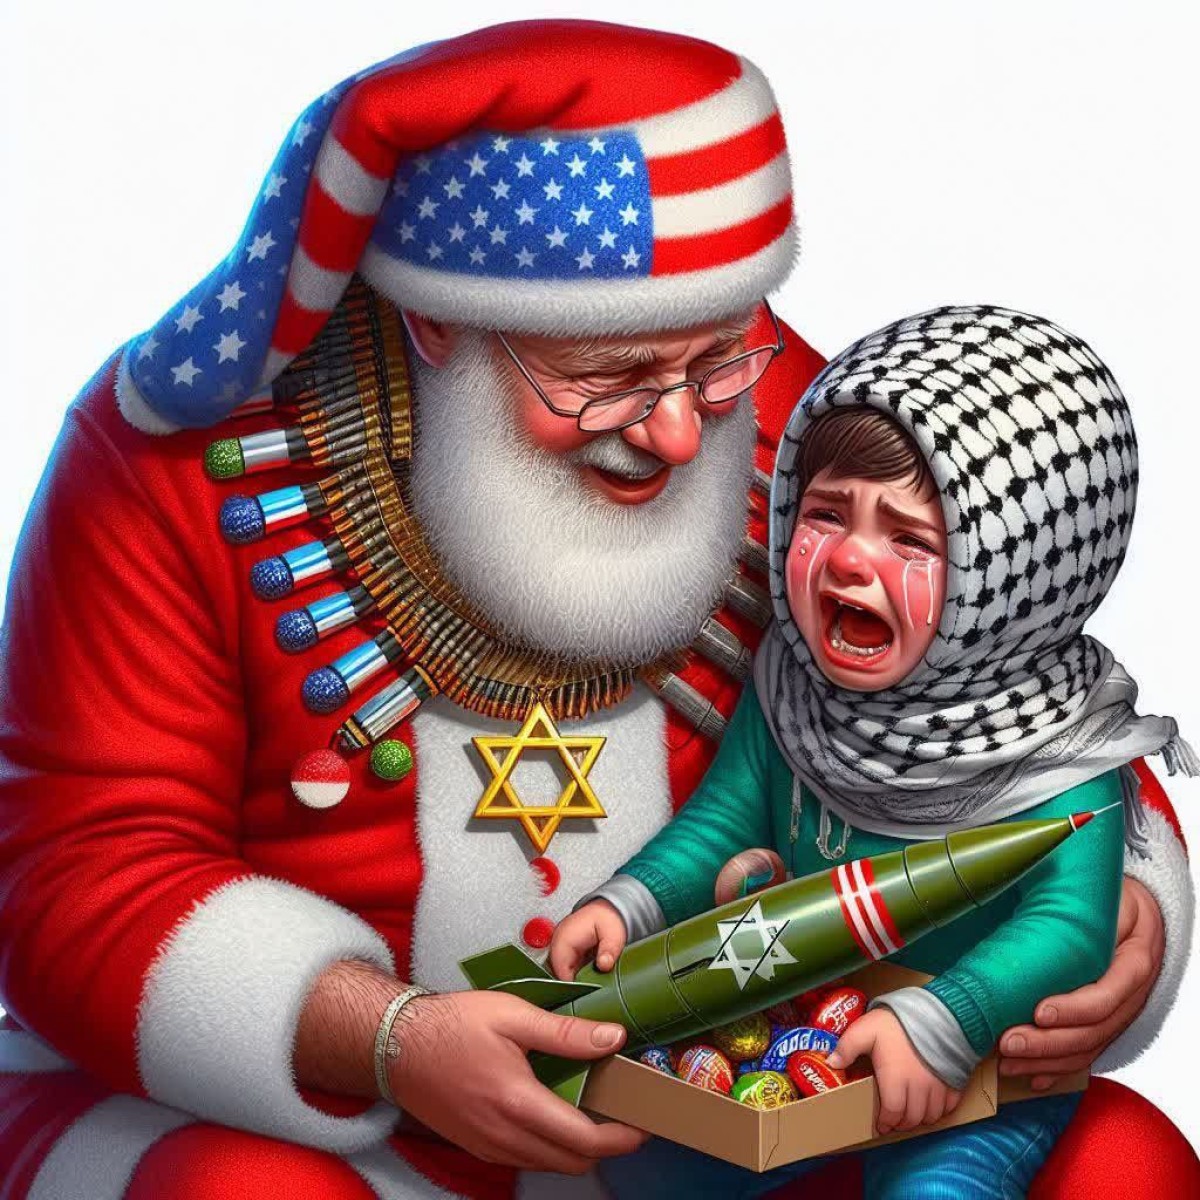 christmas gift from american santa claus to the children of gaza